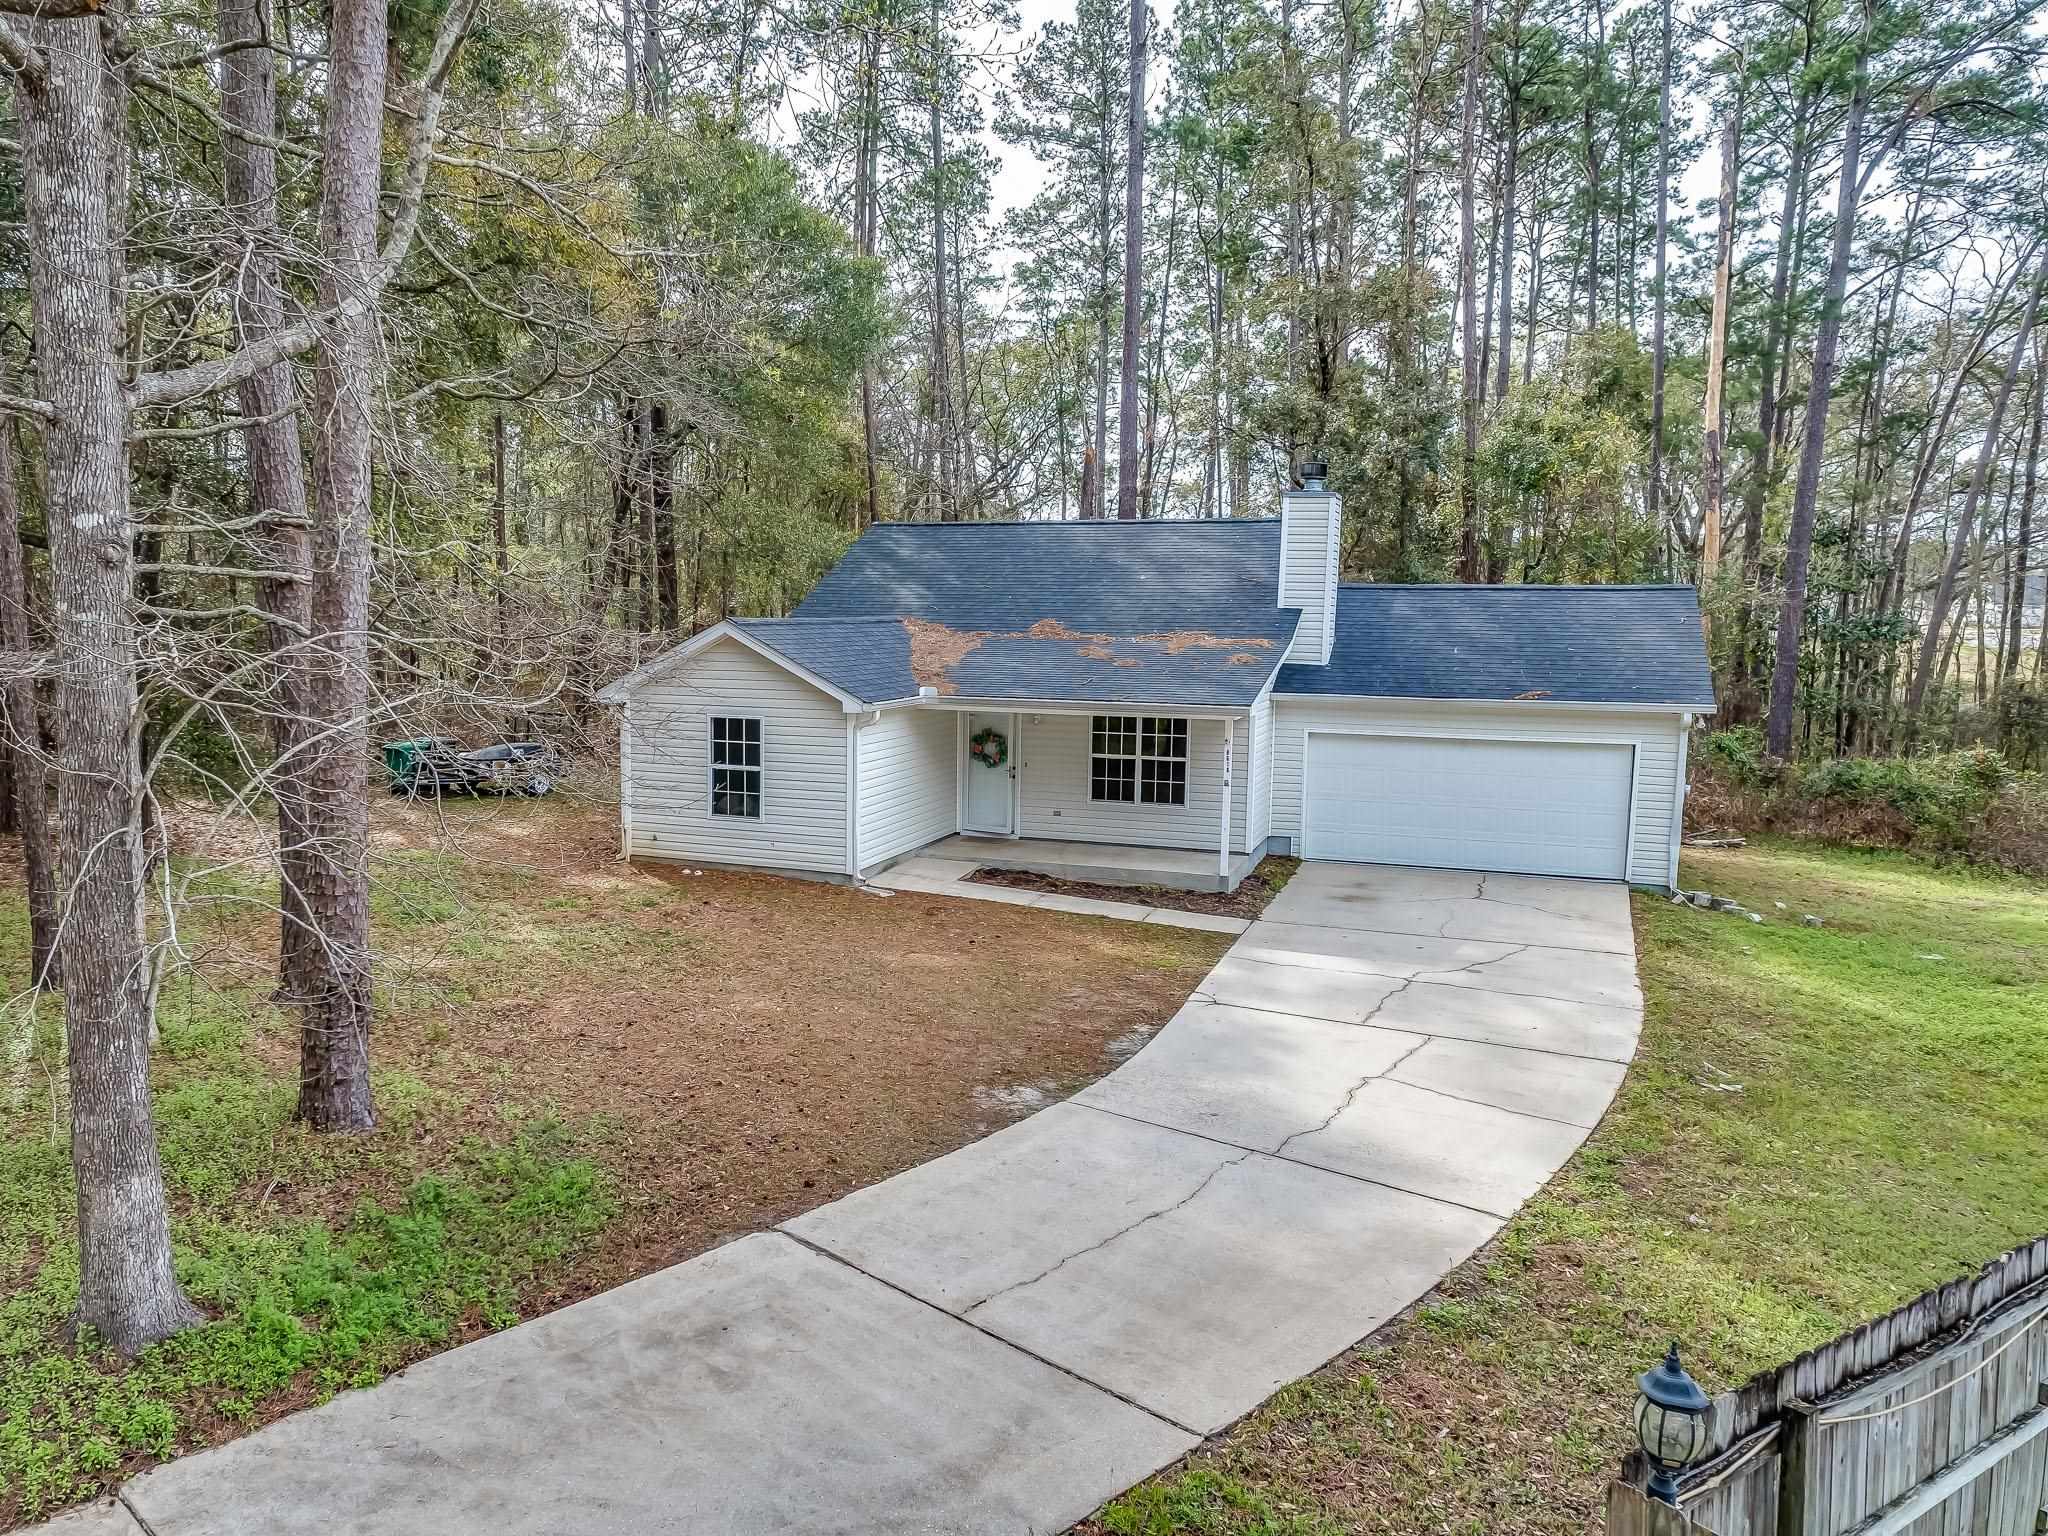 8616 Oak Forest Trail,TALLAHASSEE,Florida 32312,3 Bedrooms Bedrooms,2 BathroomsBathrooms,Detached single family,8616 Oak Forest Trail,369202